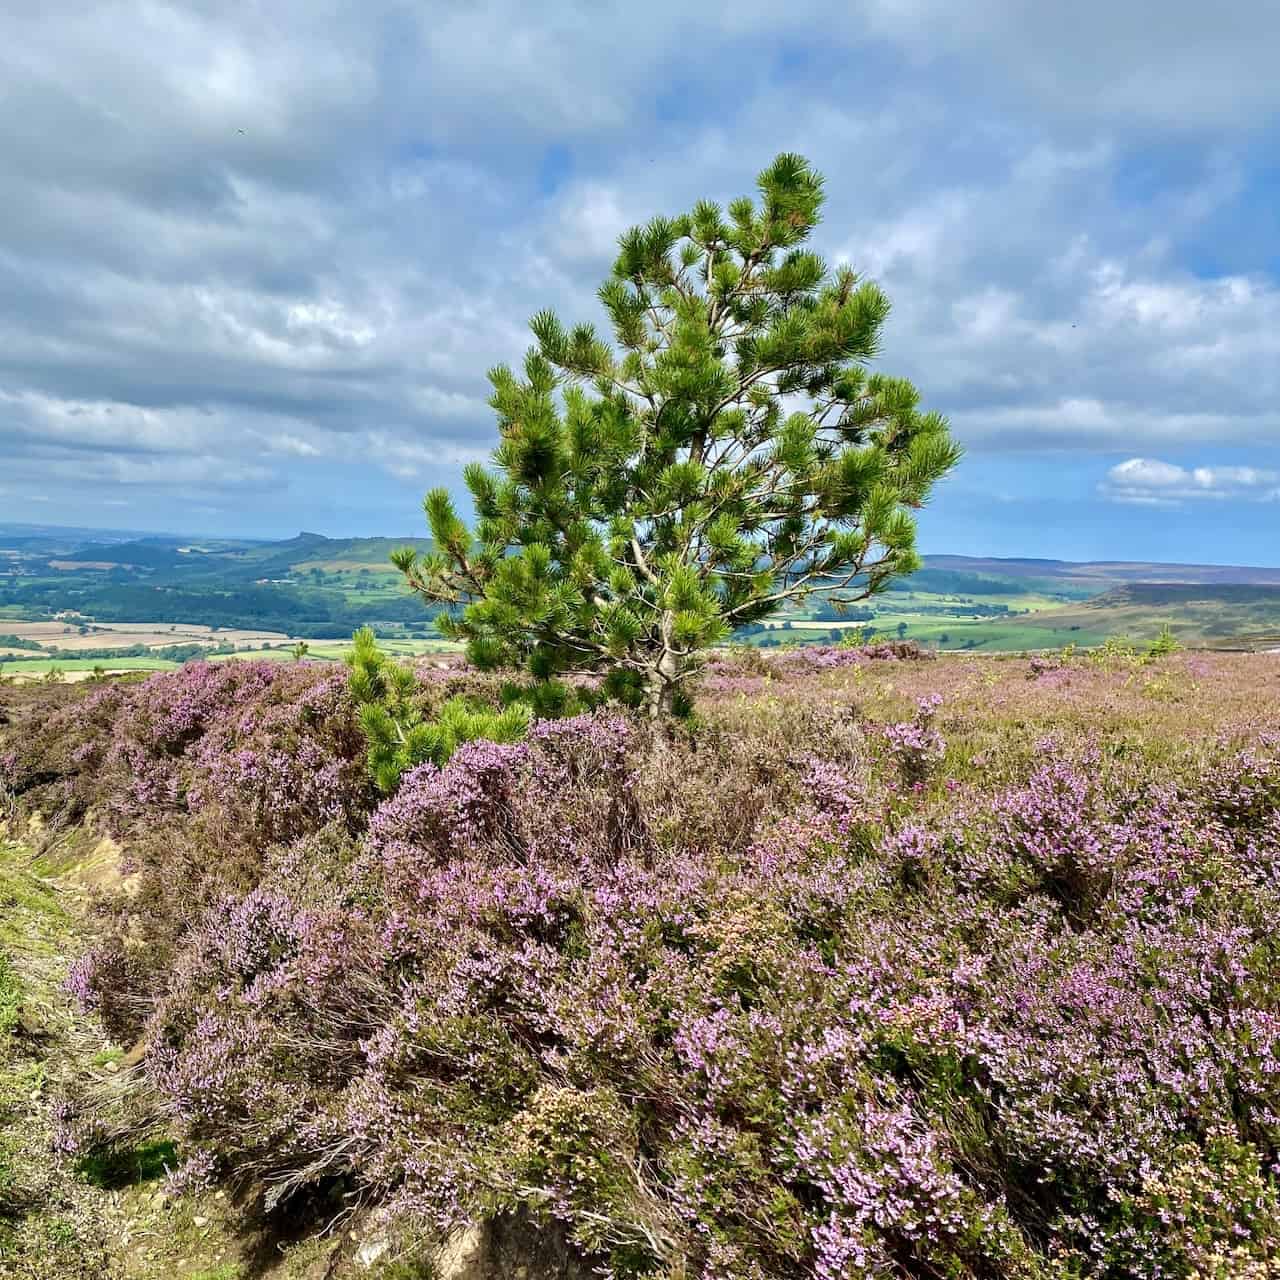 It's August and the distinctive purple tones of the blossoming heather are lovely.